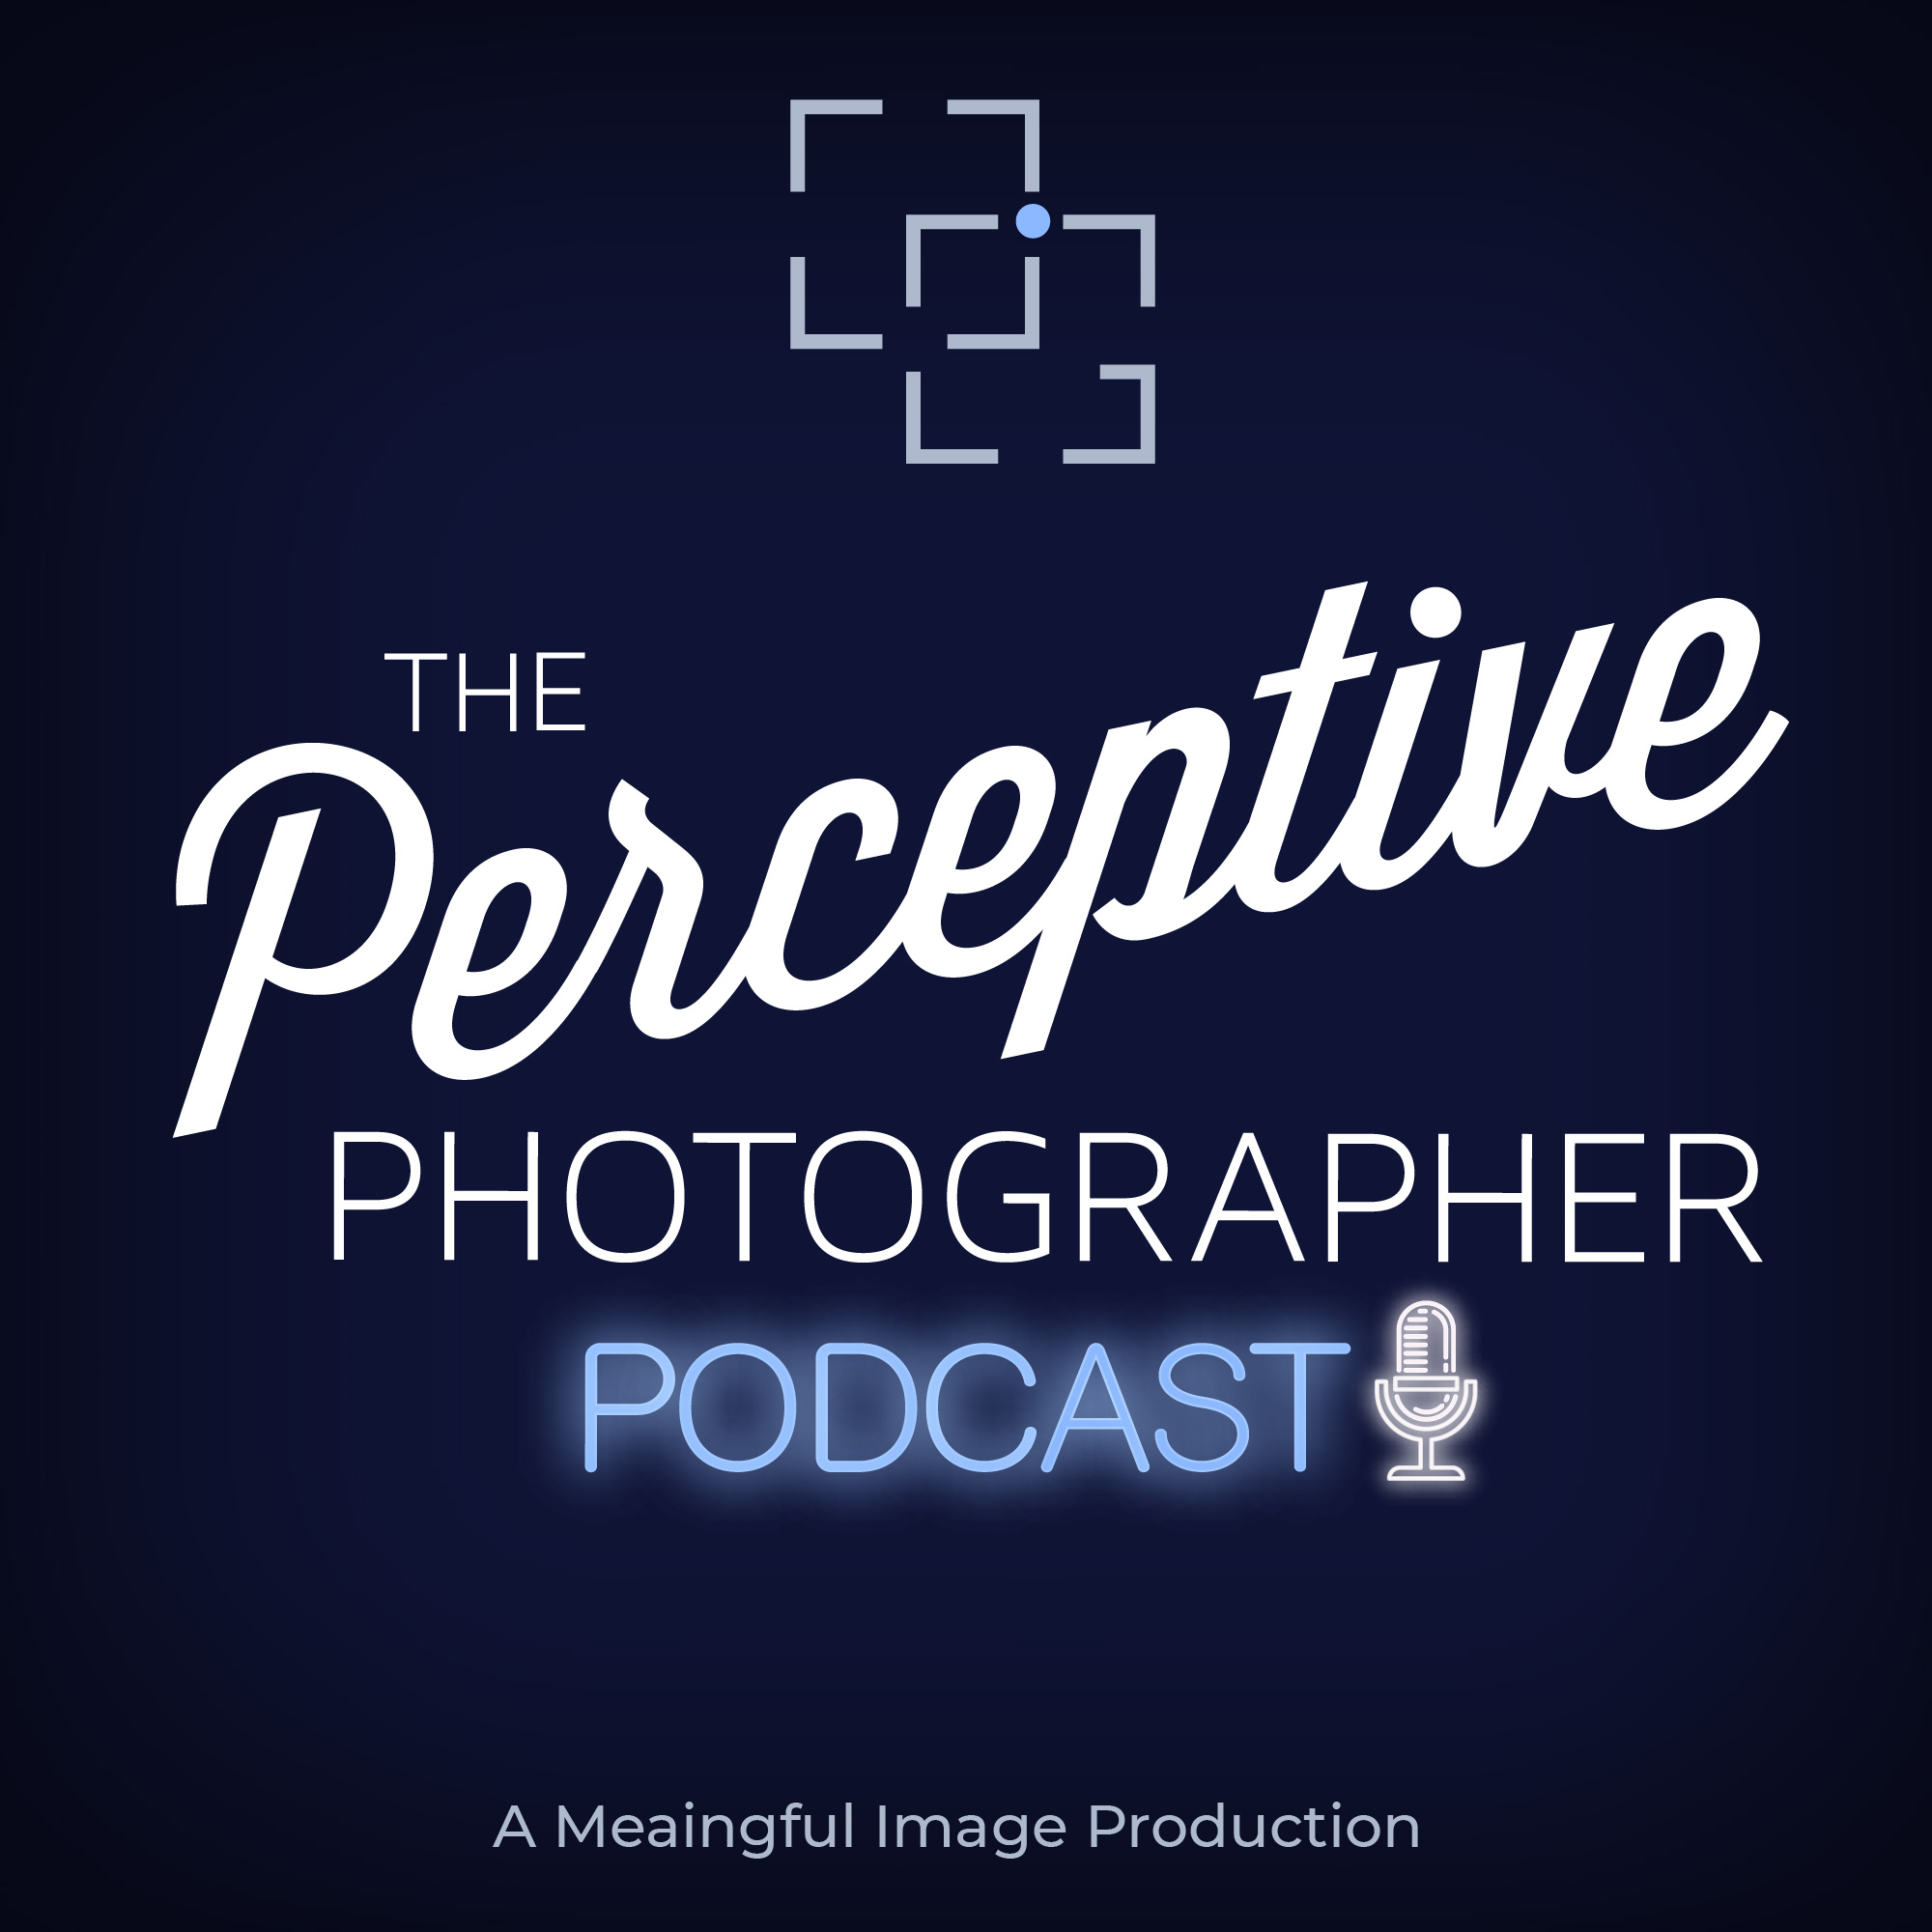 Discussing the concept of presets both in software and as a mindset for photographers